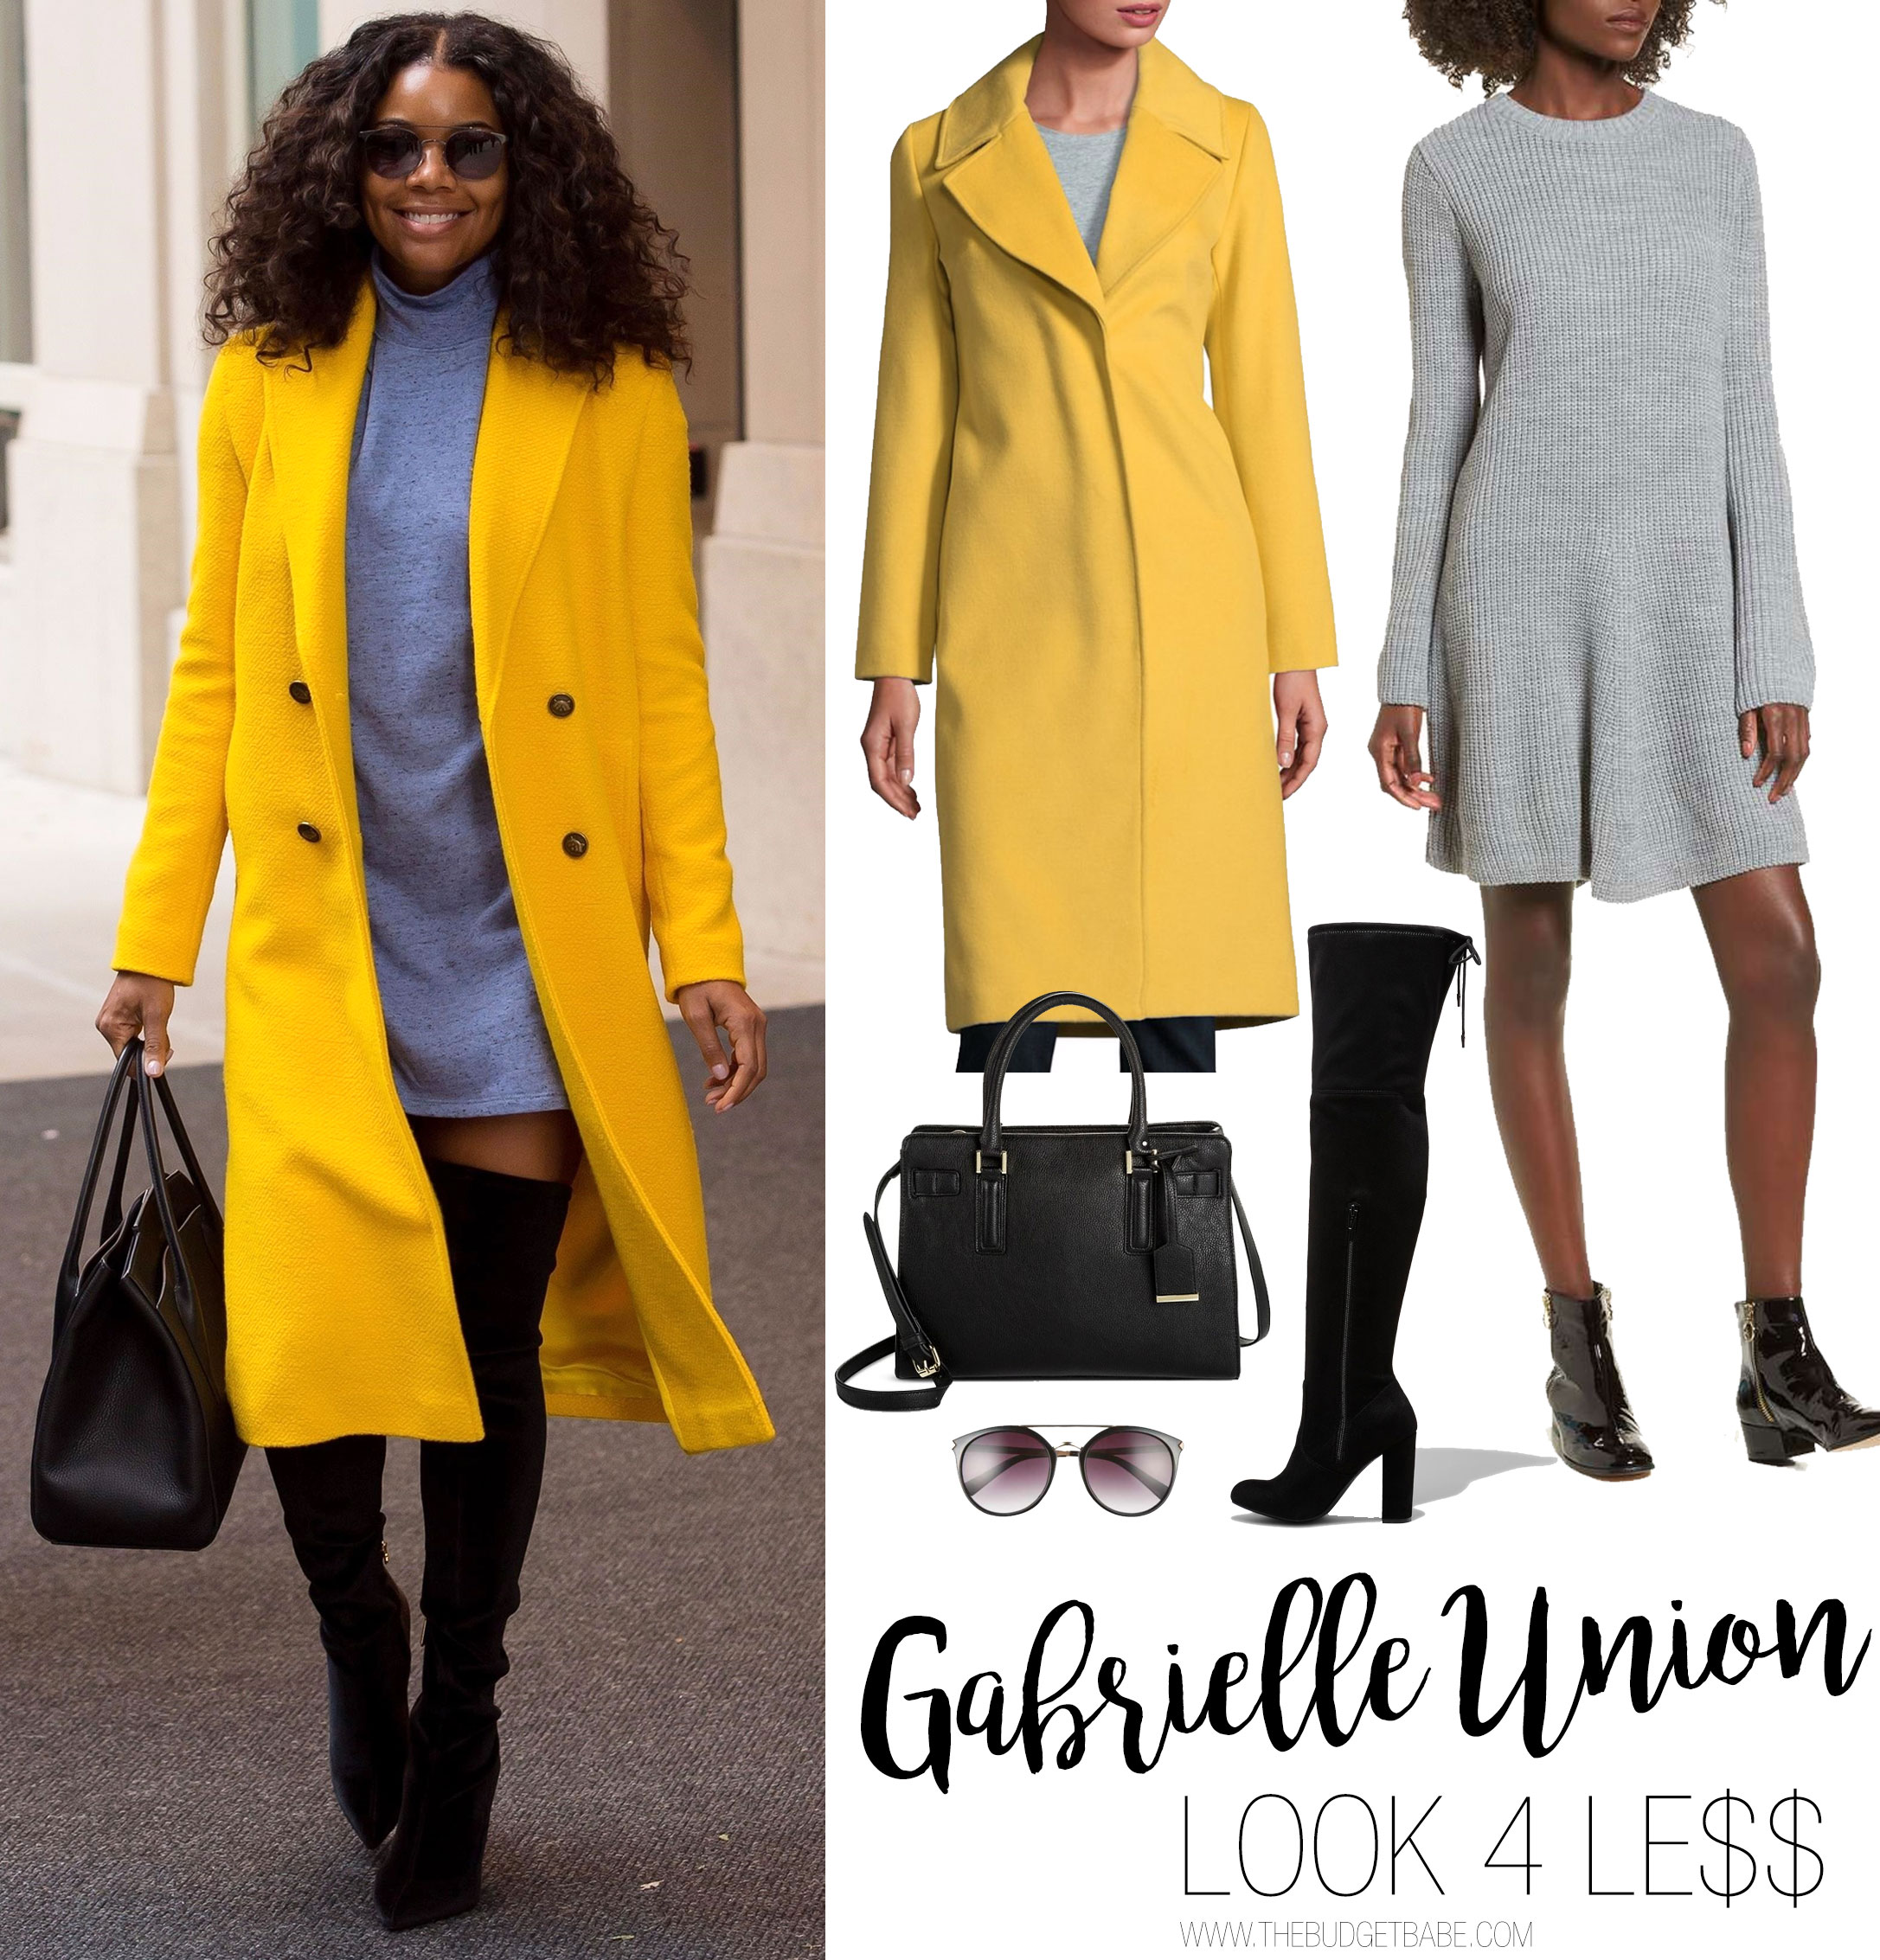 Gabrielle Union wears a bright yellow wool coat with a gray sweatedress and black over-the-knee boots.